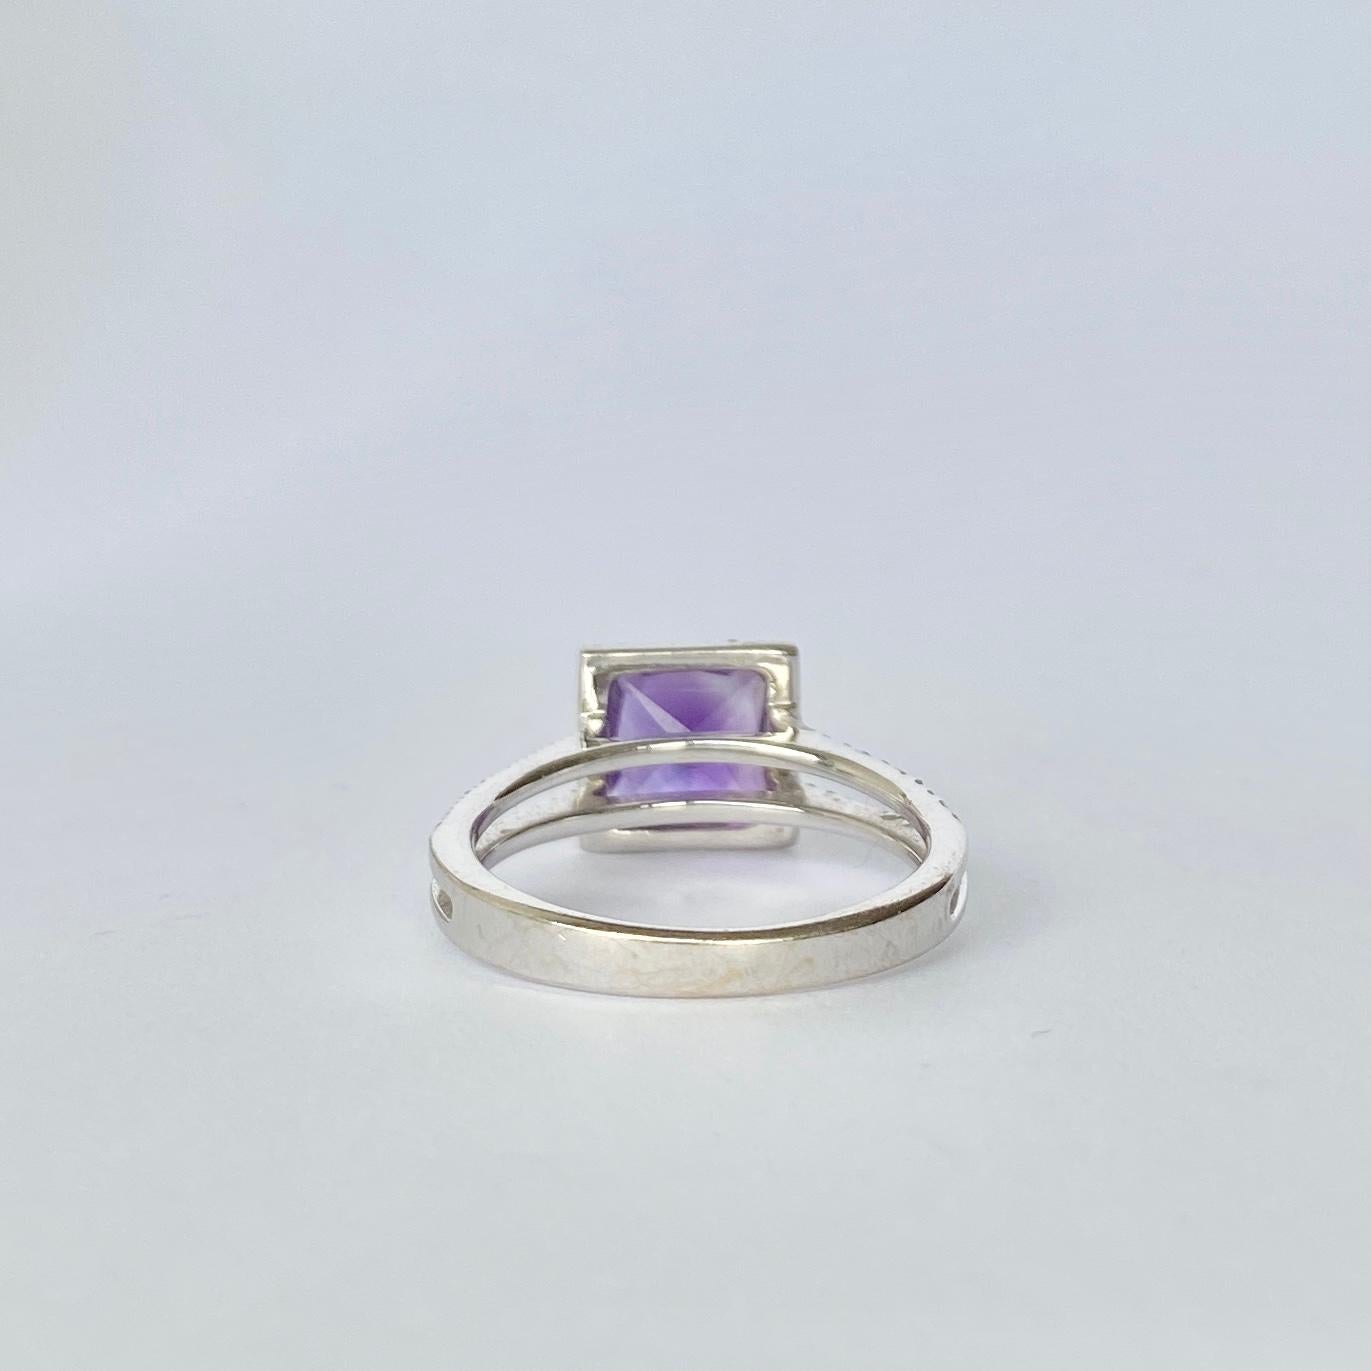 The gorgeous amethyst stone in this cluster is a bright purple colour which is complimented by the bright diamonds which surround it. The diamonds total 80pts and the amethysts total approx 1.5ct. The ring is modelled in 18ct white gold.  

Ring